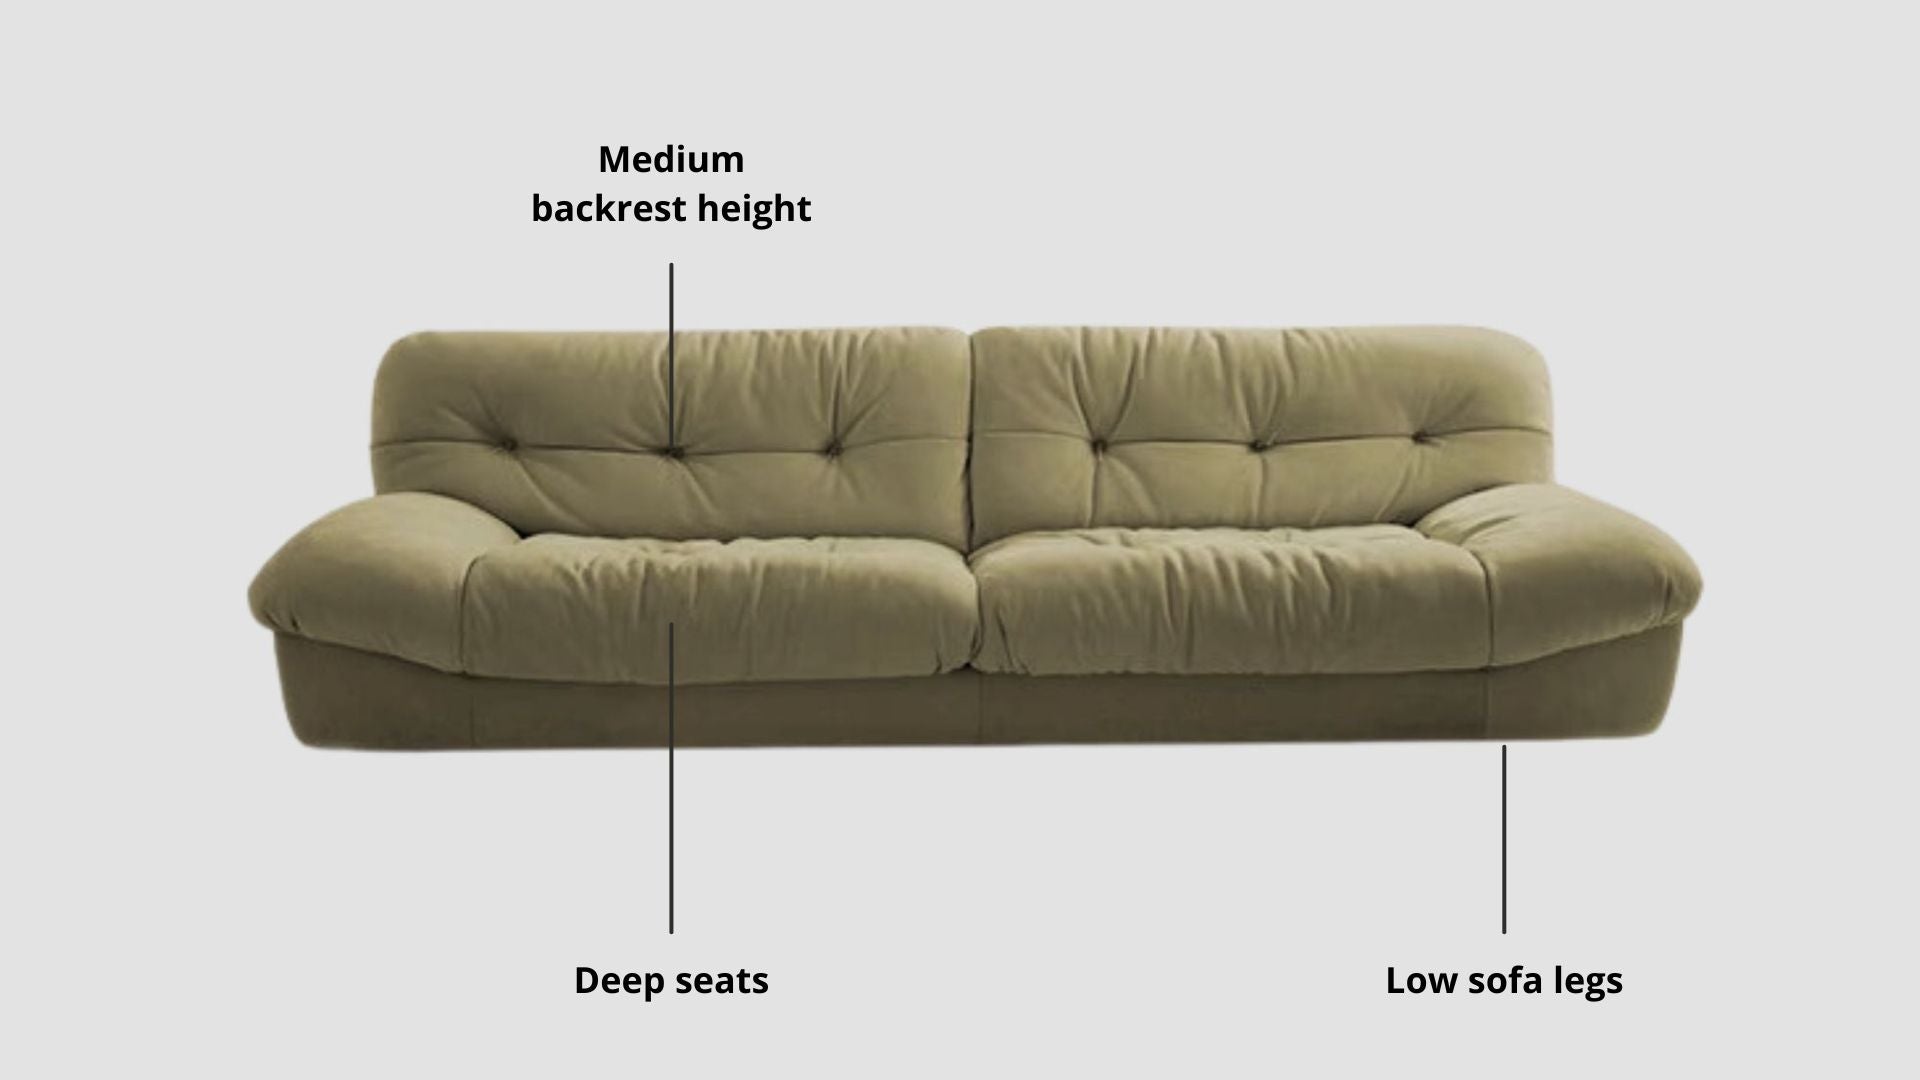 Key features such as armrest thickness, cushion height, seat depth and sofa leg height for Clora Fabric Sofa